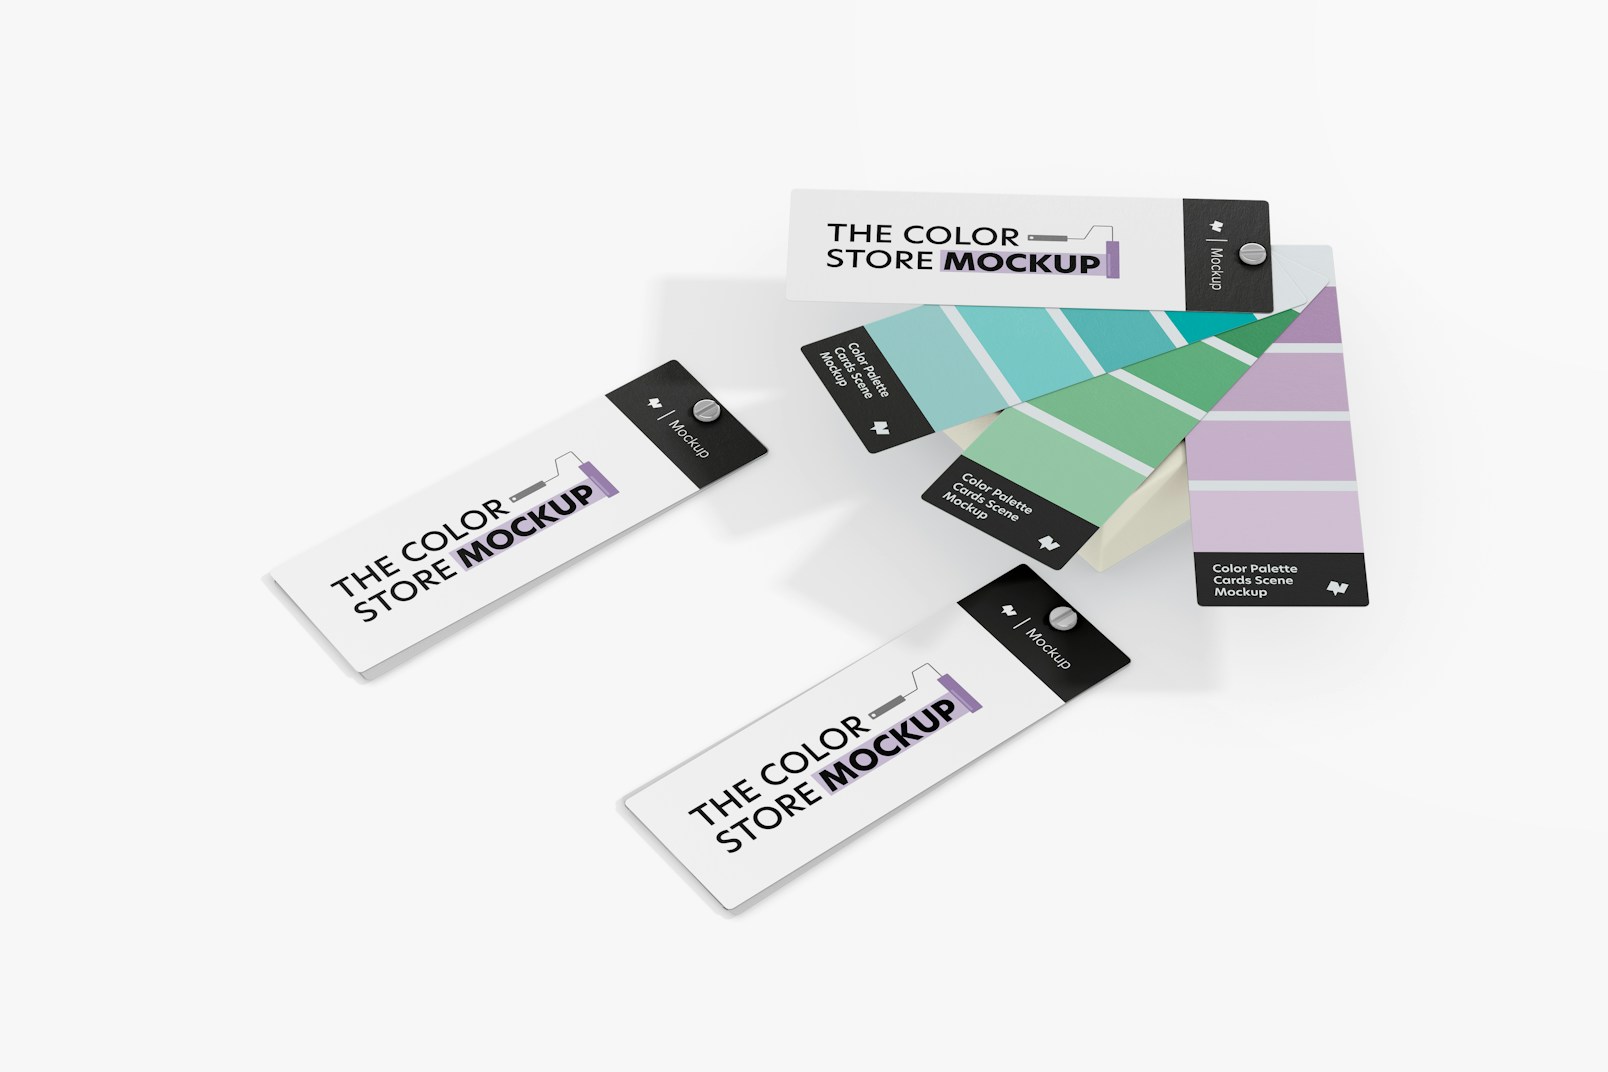 Color Palette Cards Scene Mockup, Opened and Closed